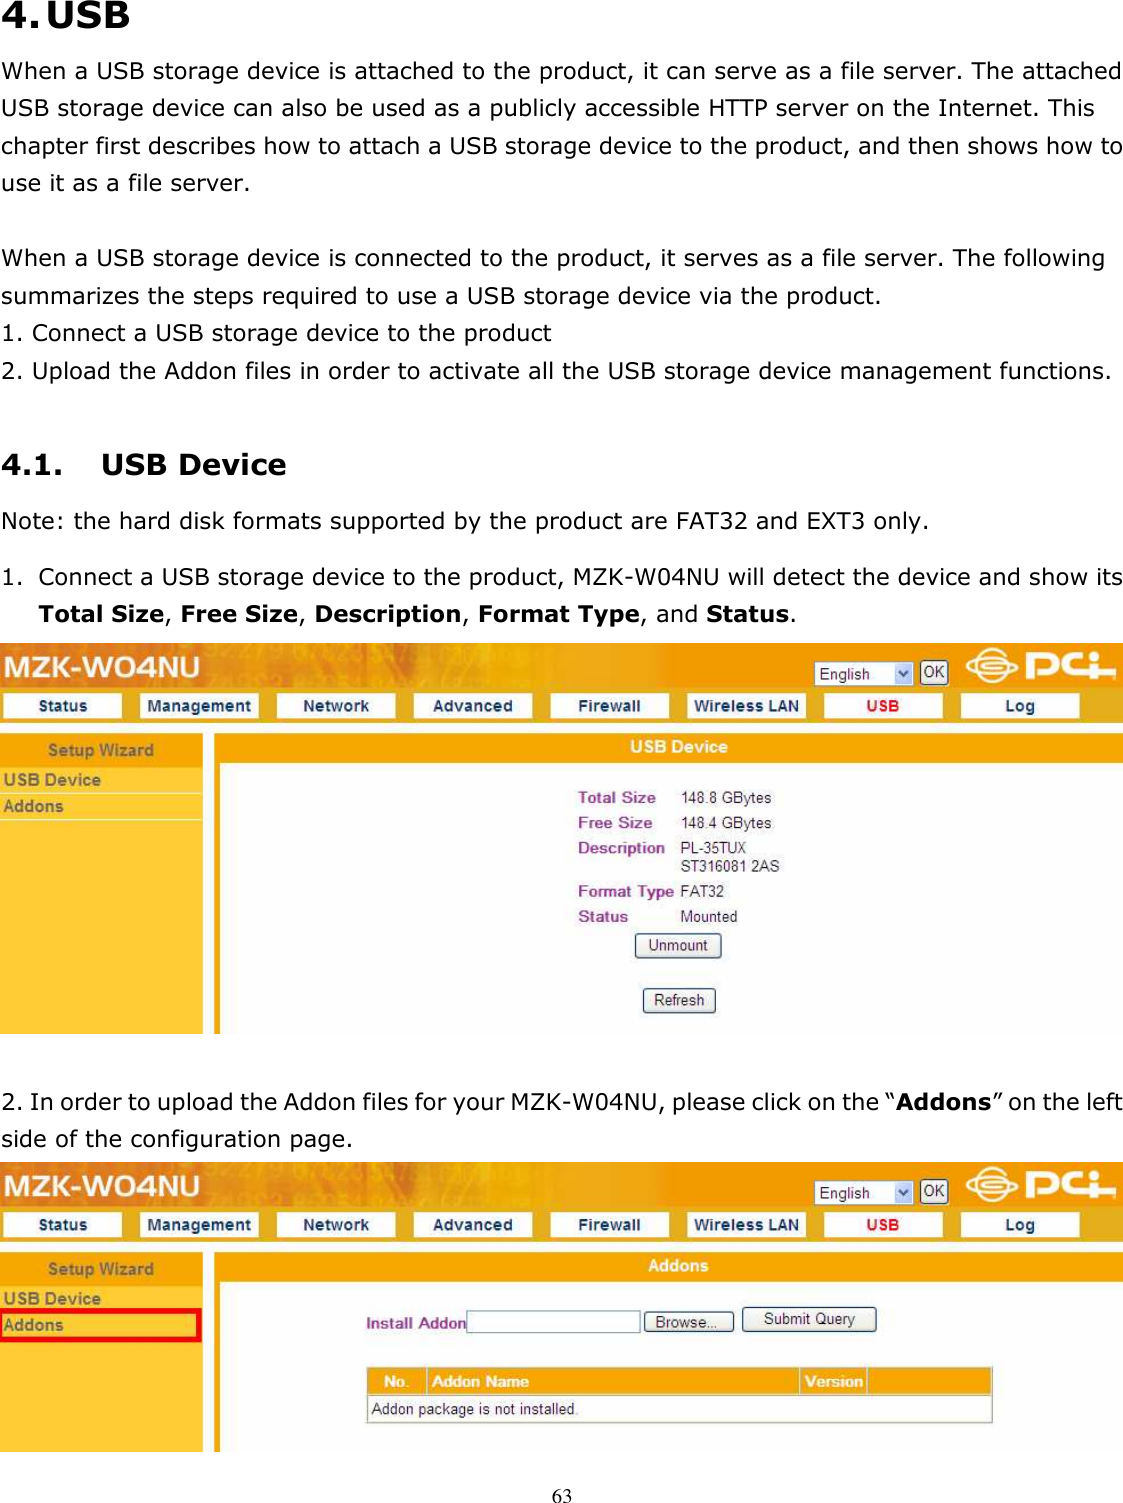   634. USB When a USB storage device is attached to the product, it can serve as a file server. The attached USB storage device can also be used as a publicly accessible HTTP server on the Internet. This chapter first describes how to attach a USB storage device to the product, and then shows how to use it as a file server.     When a USB storage device is connected to the product, it serves as a file server. The following summarizes the steps required to use a USB storage device via the product.     1. Connect a USB storage device to the product 2. Upload the Addon files in order to activate all the USB storage device management functions.    4.1. USB Device Note: the hard disk formats supported by the product are FAT32 and EXT3 only.     1. Connect a USB storage device to the product, MZK-W04NU will detect the device and show its Total Size, Free Size, Description, Format Type, and Status.   2. In order to upload the Addon files for your MZK-W04NU, please click on the “Addons” on the left side of the configuration page.    